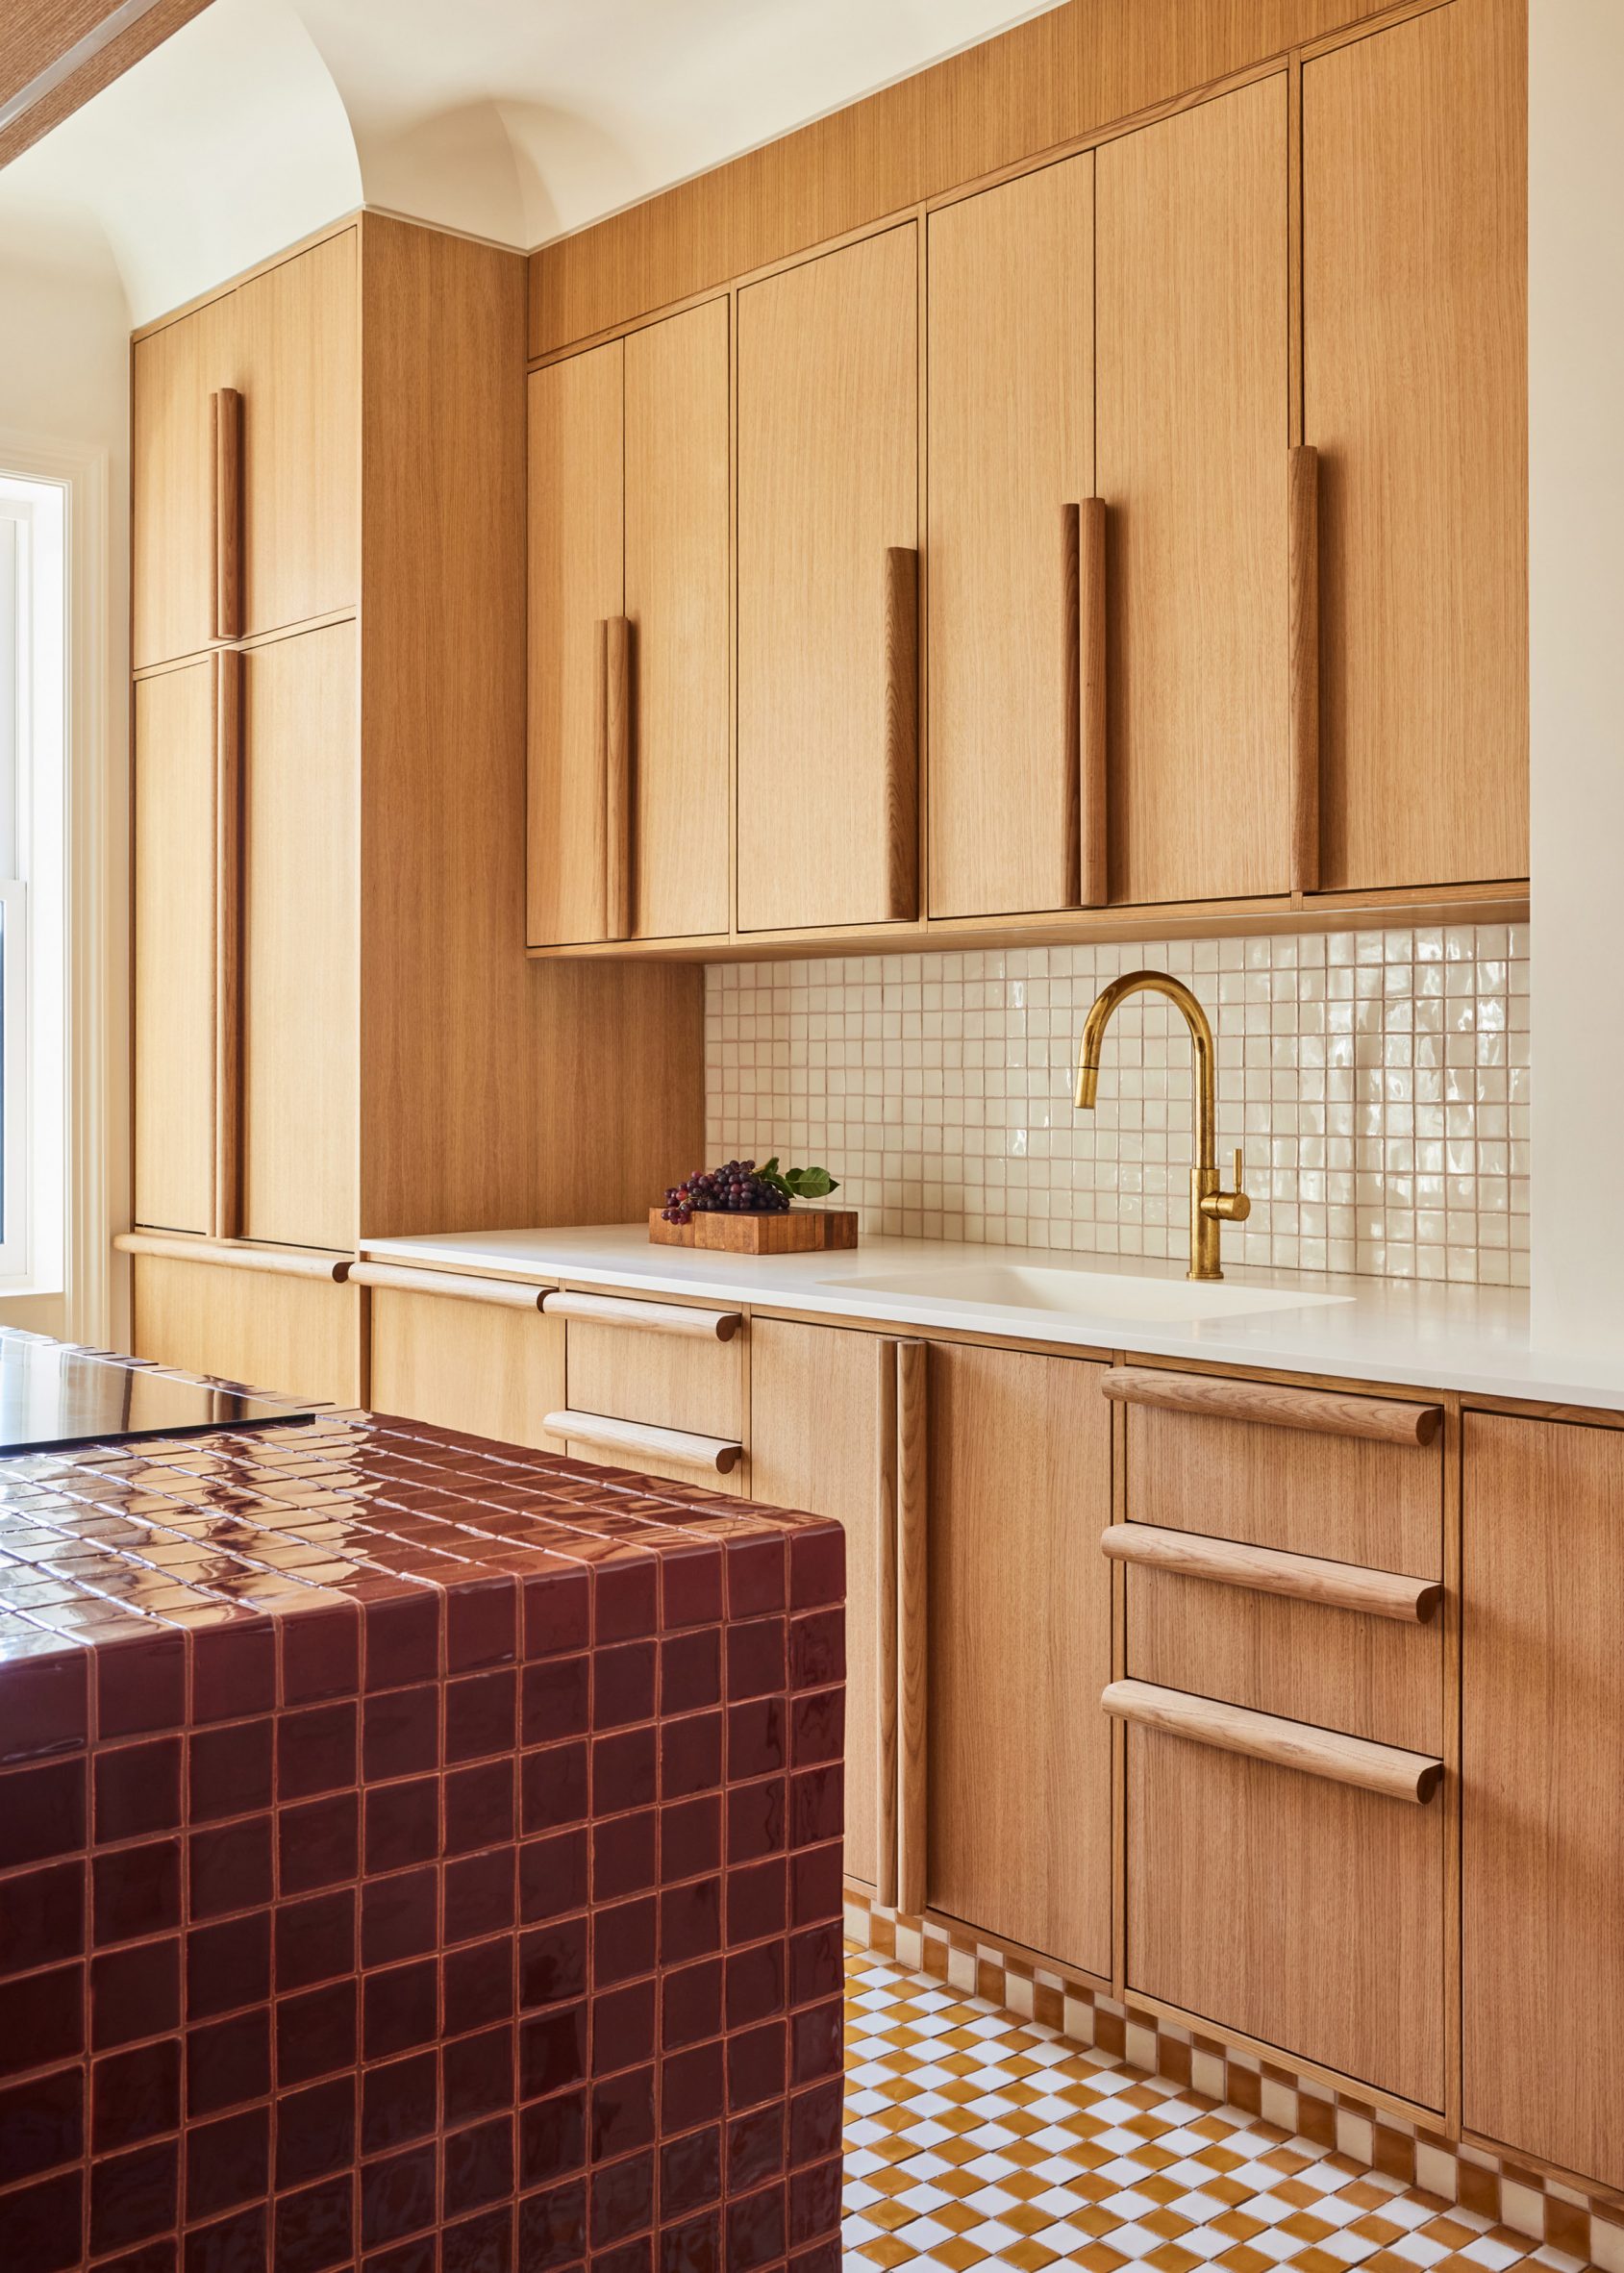 Kitchen with oxblood tiled island and white oak cabinets